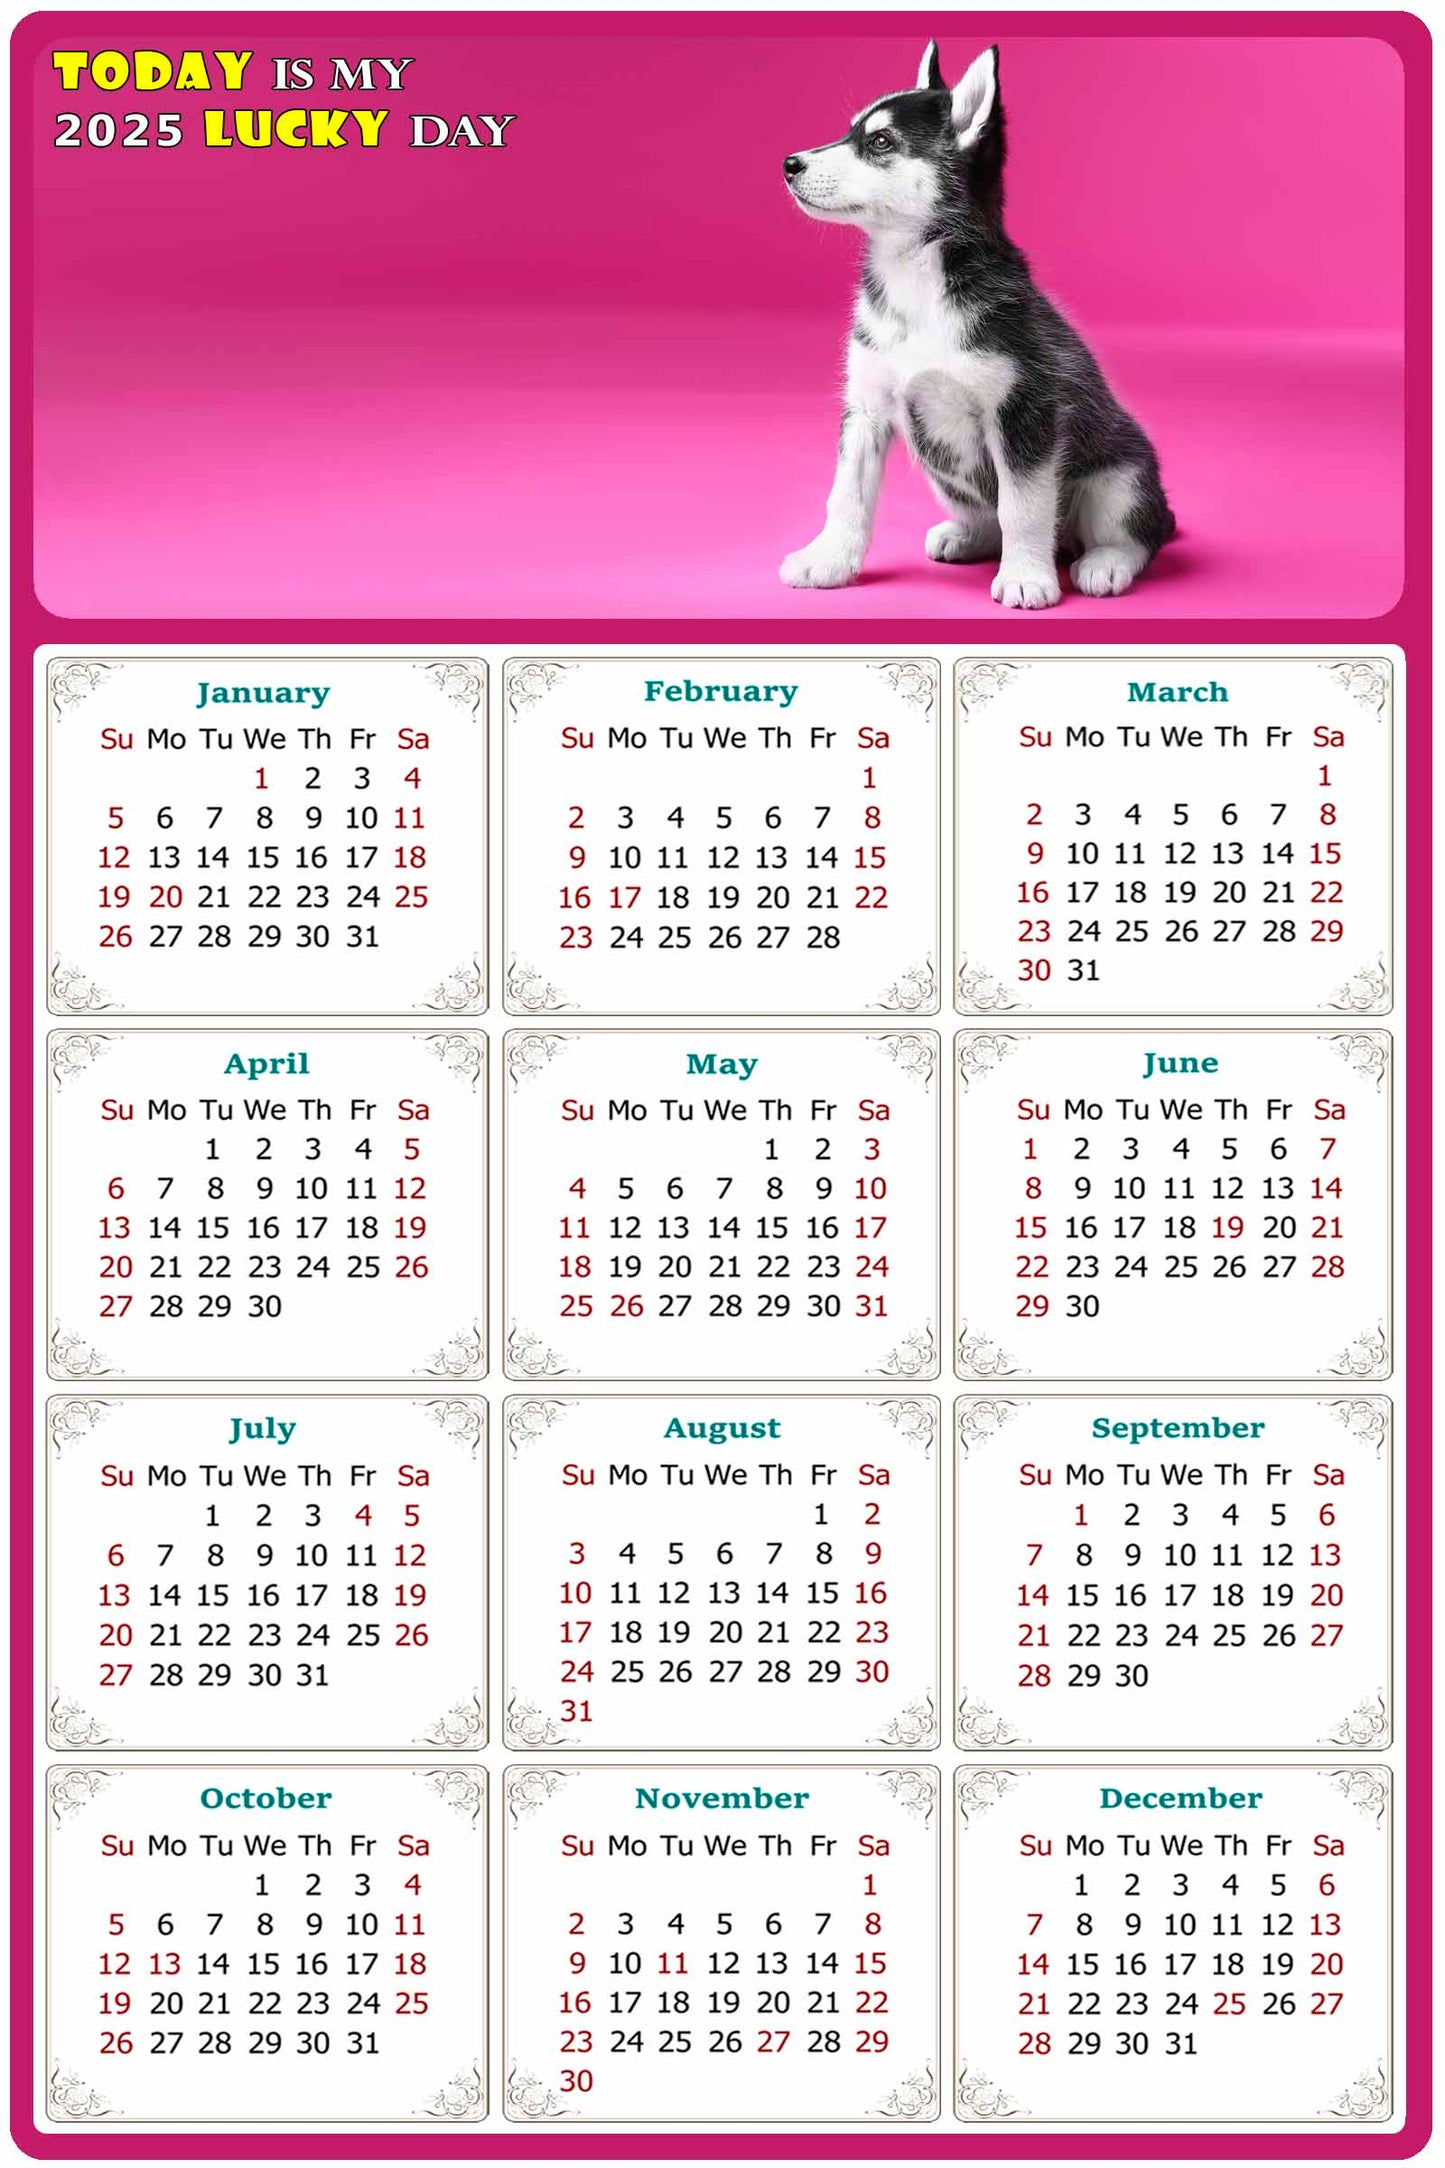 2025 Magnetic Calendar - Today is My Lucky Day (Fade, Tear, and Water Resistant)- Dogs Themed 023